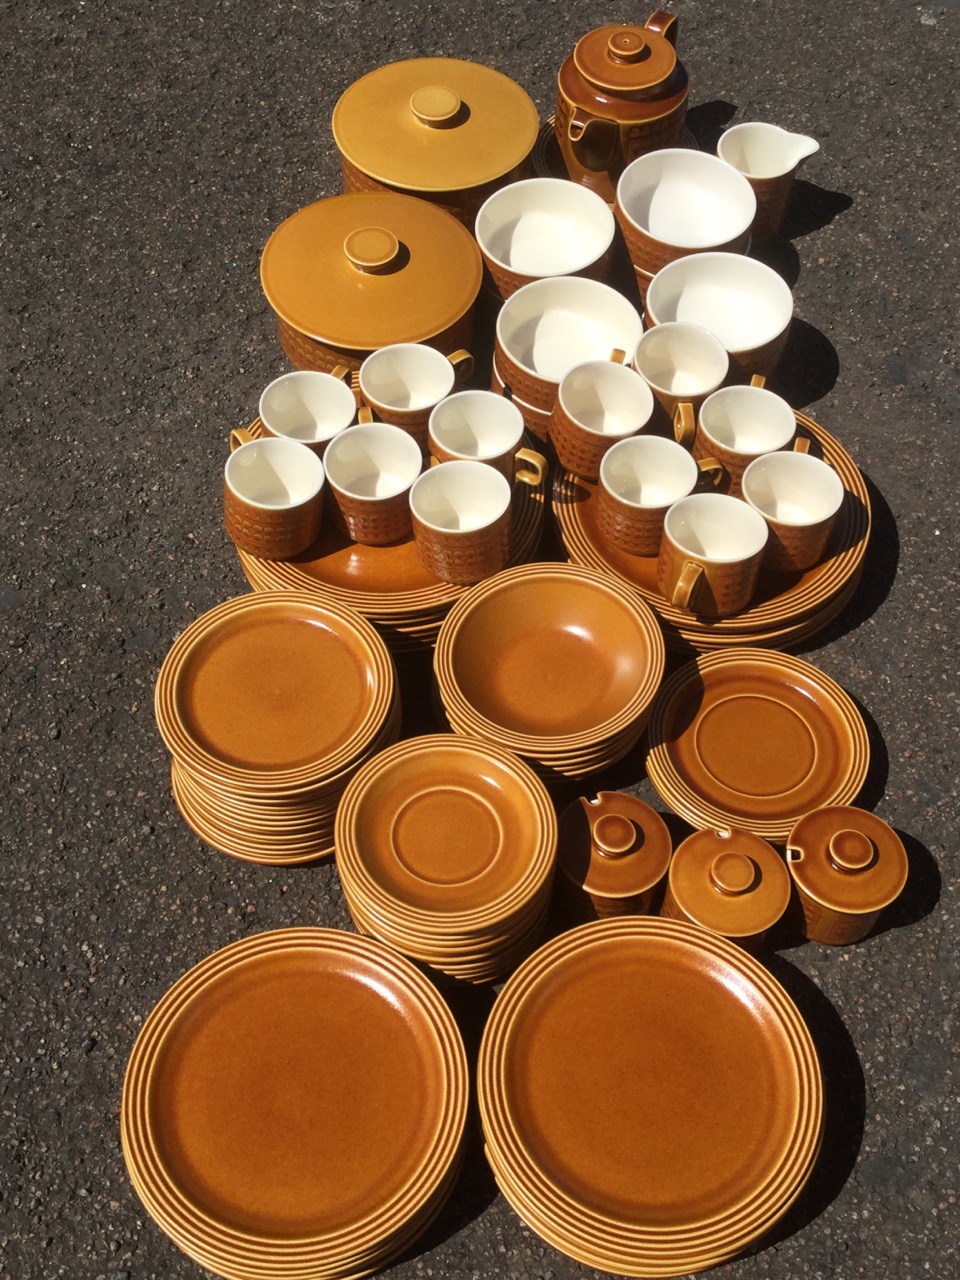 An extensive Hornsea dinner & breakfast set decorated in the Saffron pattern with plates, cups &